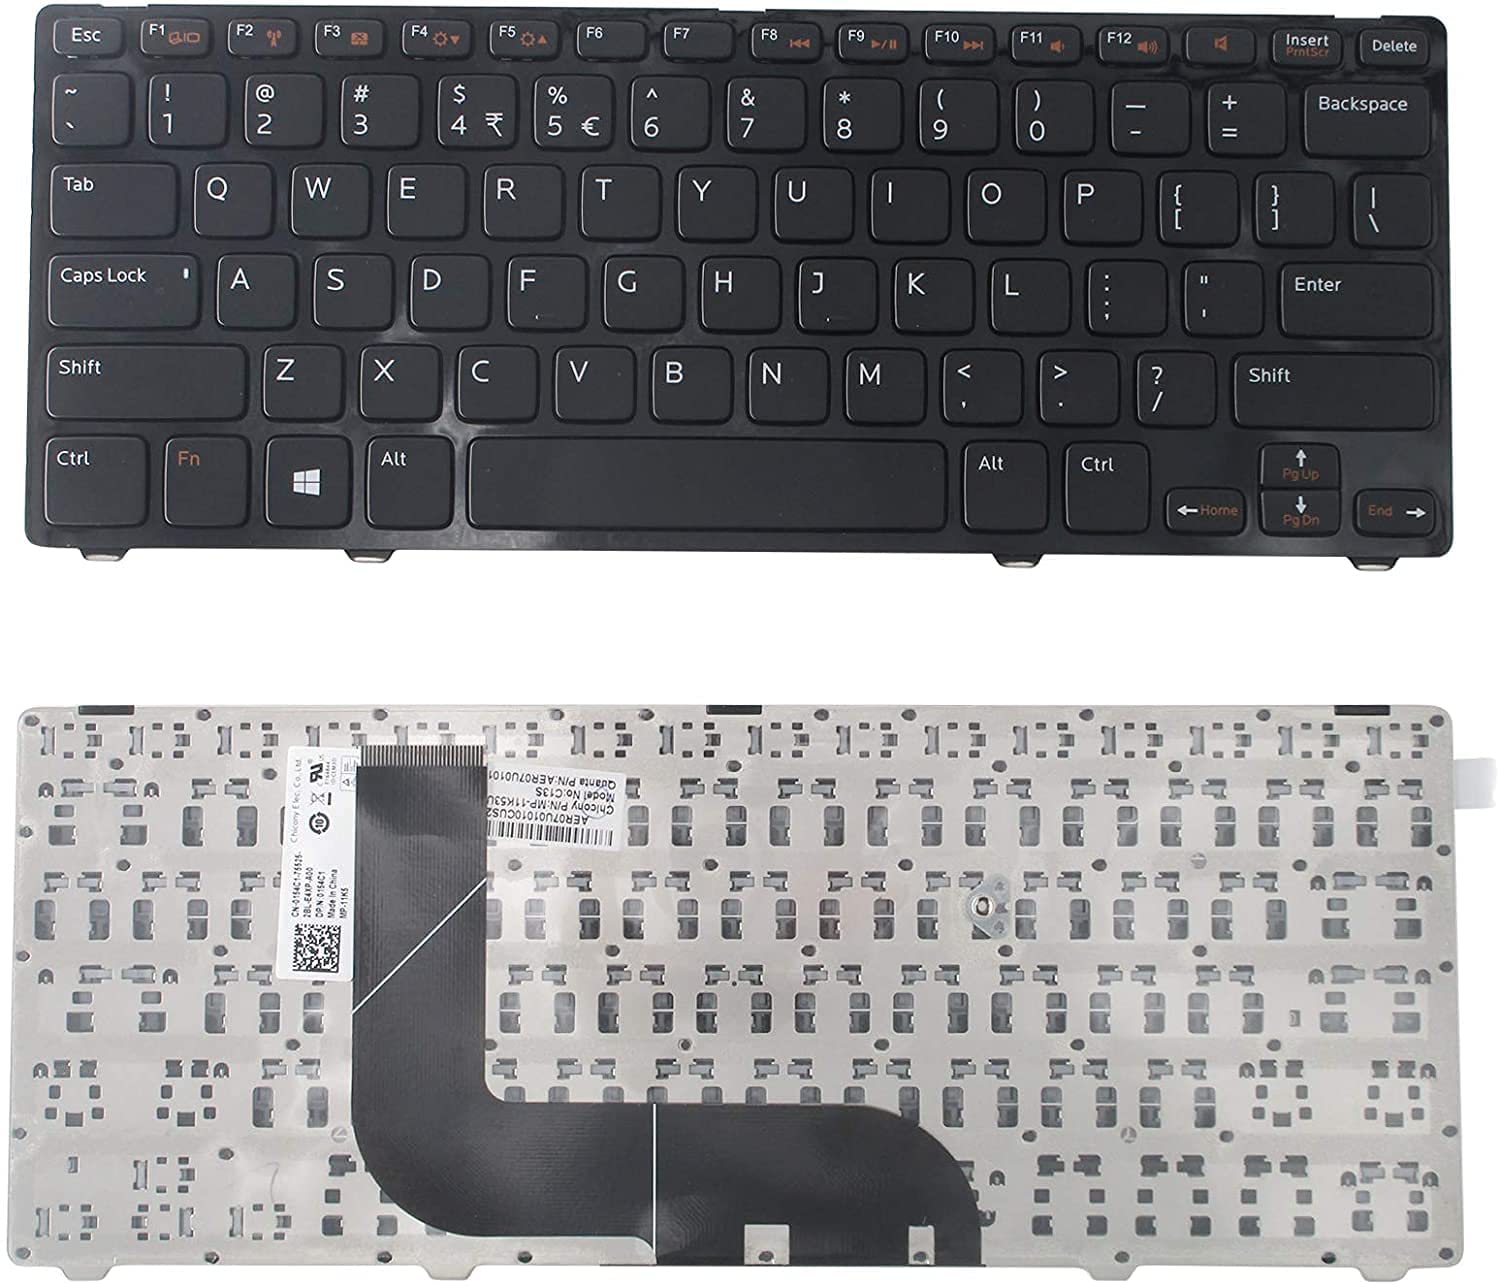 WISTAR Laptop Keyboard Compatible for Dell INSPIRON 14Z 5423 13Z-5323  14Z-4523 14Z-3528 14Z-3526 14Z-5323, Vostro 3360 v3360 v3560D V3360D V3450D V3460D 5FCV3 V128725BS1